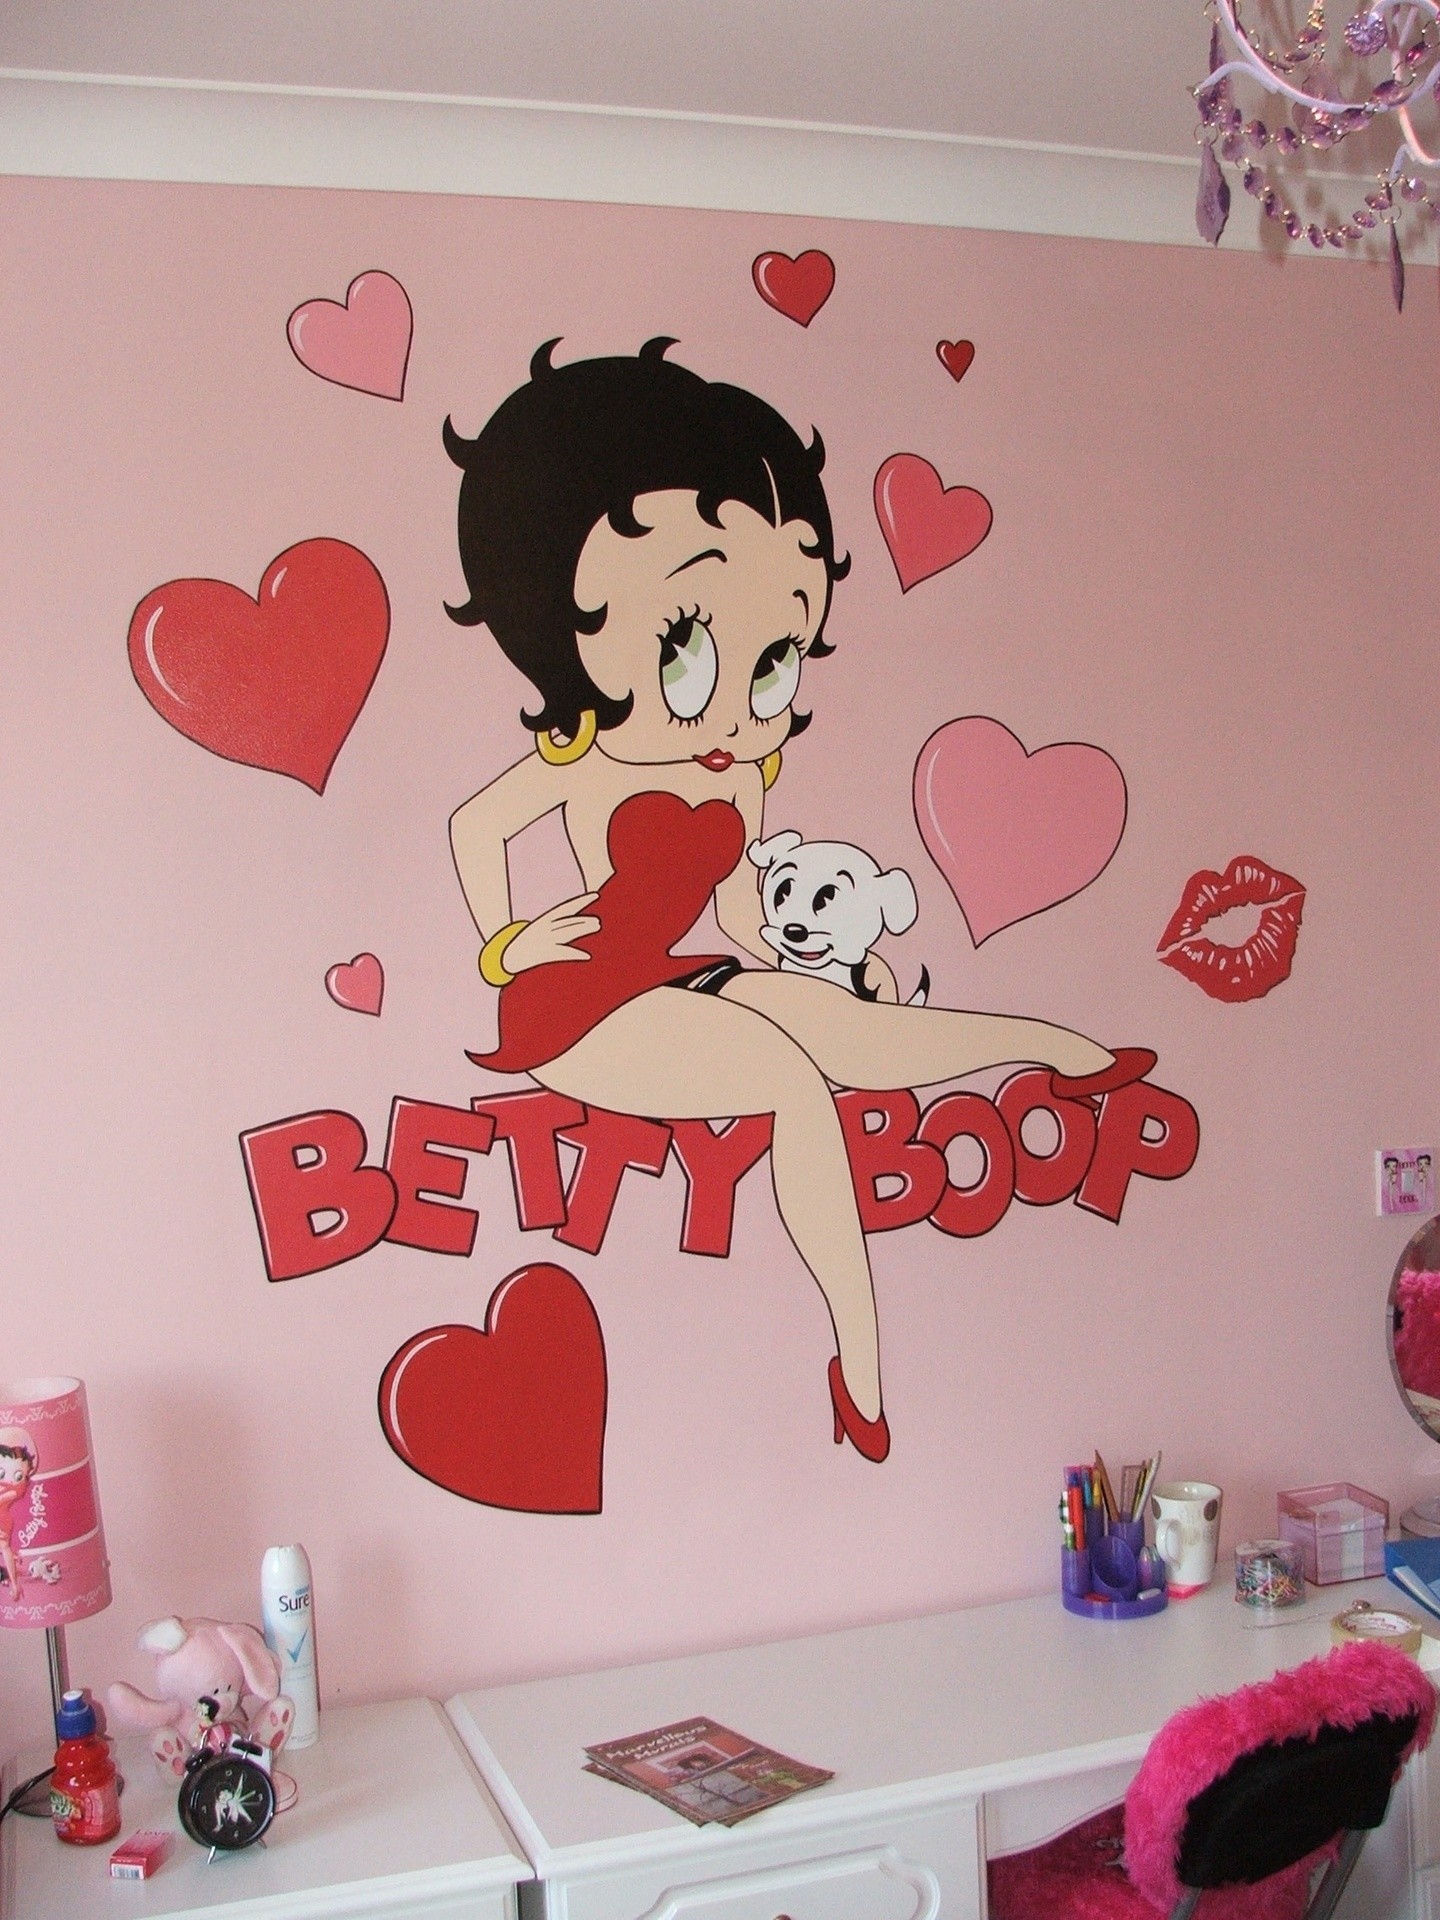 1440x1920 Betty Boop Wallpaper For Bedroom Piazzesi throughout proportions 1440 X 1920